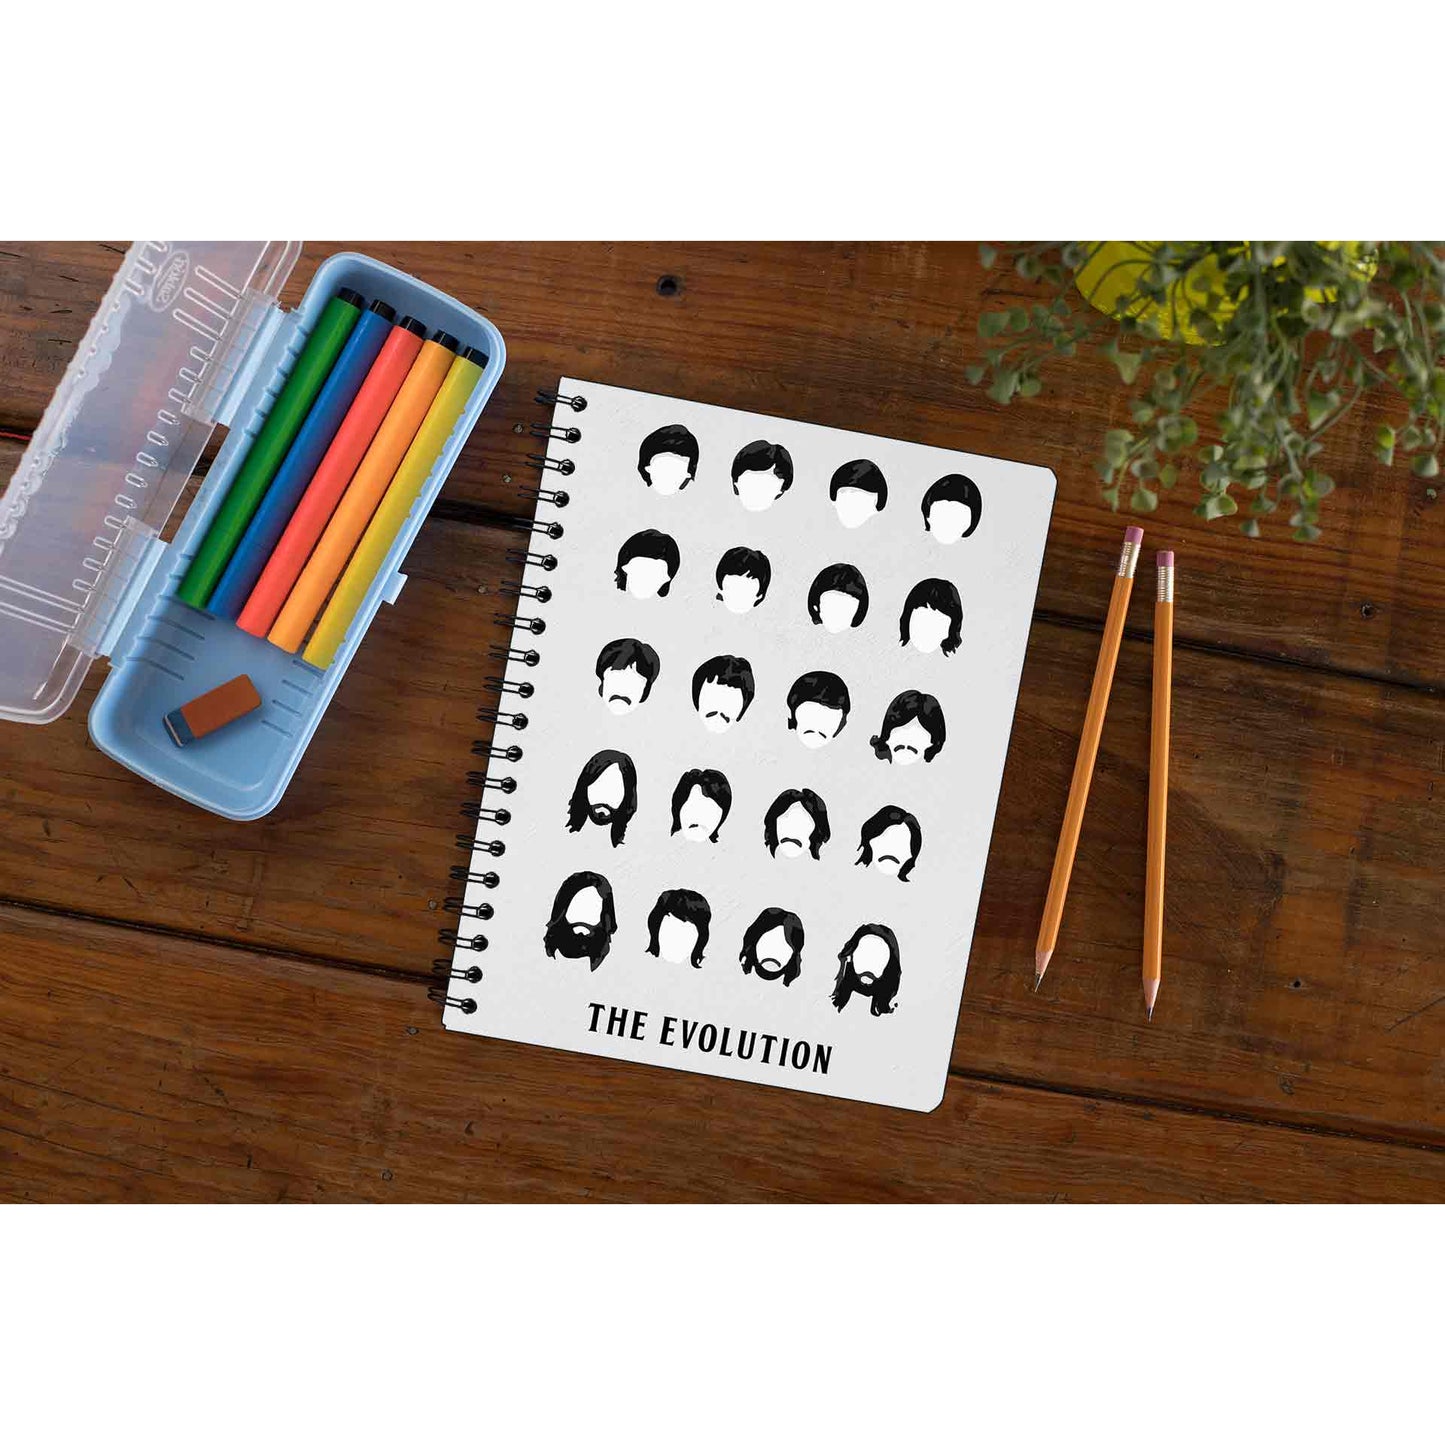 The Beatles Notebook - Evolution Notebook The Banyan Tee TBT Notepad paper online diary personal girls cute office under 100